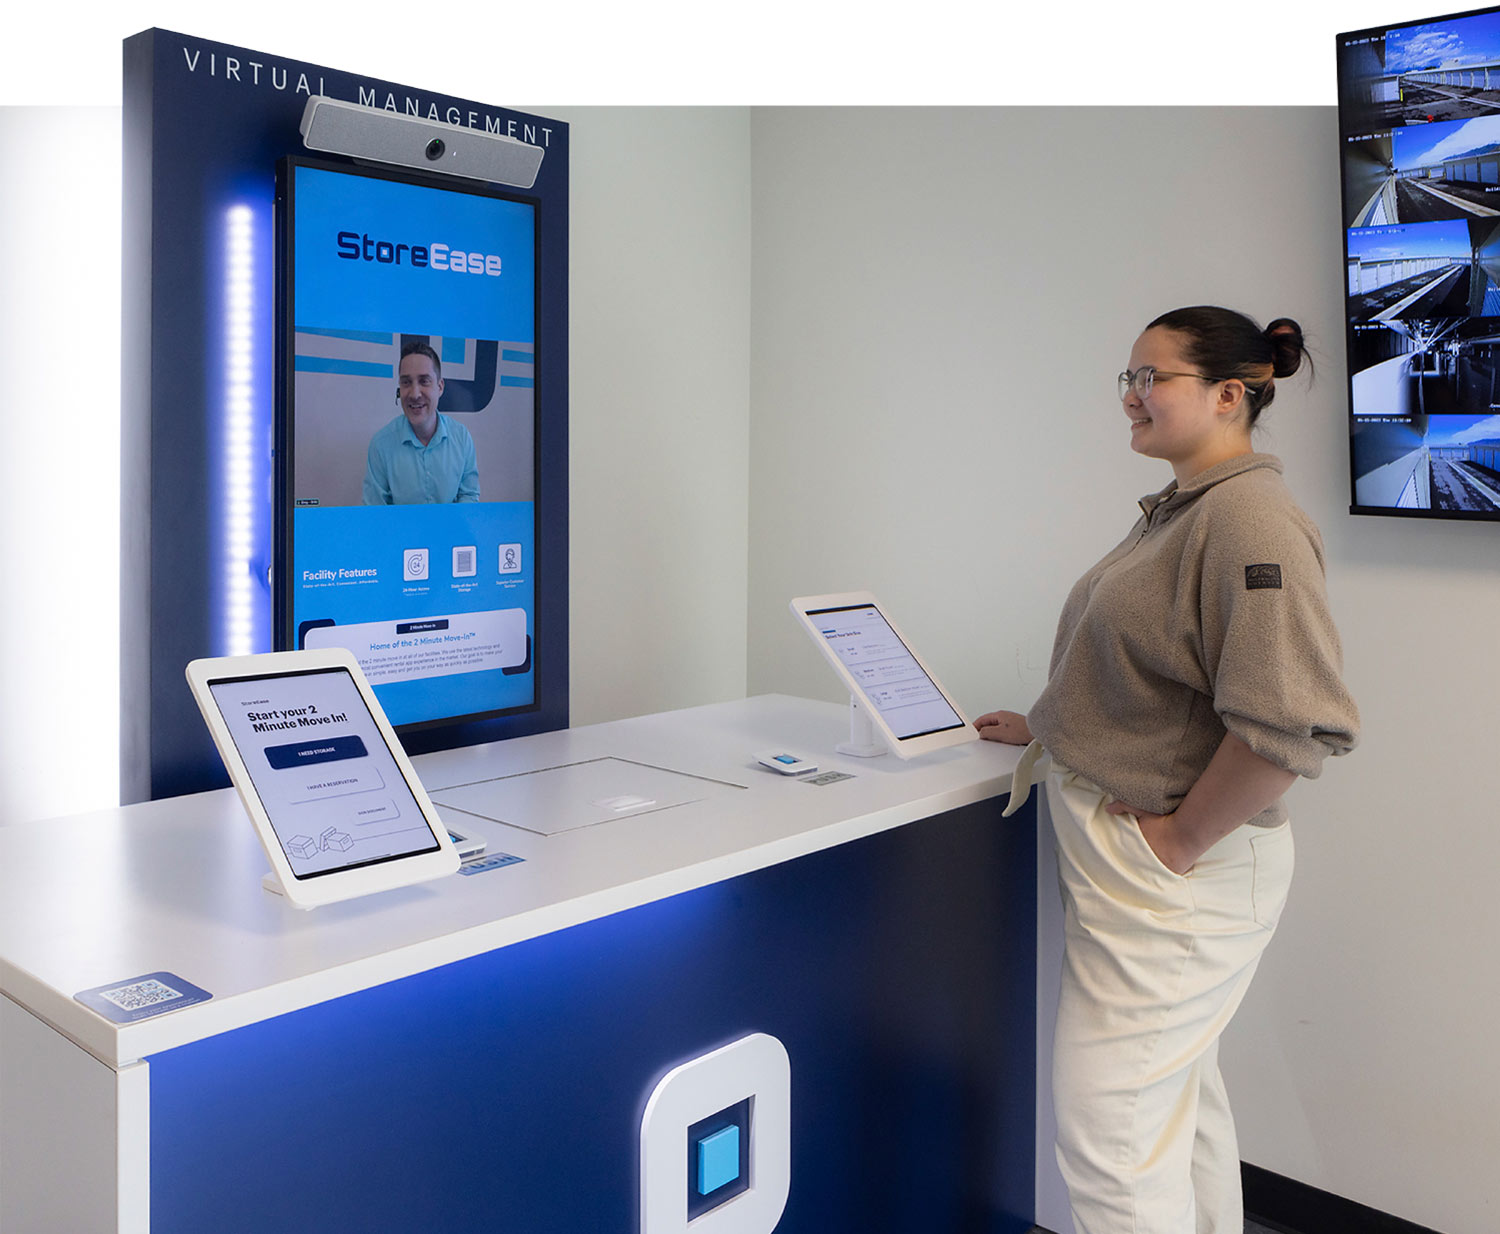 a woman smiles while standing at the StoreEase self service desk that holds two check-out tablets, behind the desk is a screen labeled Virtual Management, telecasting a StoreEase representative